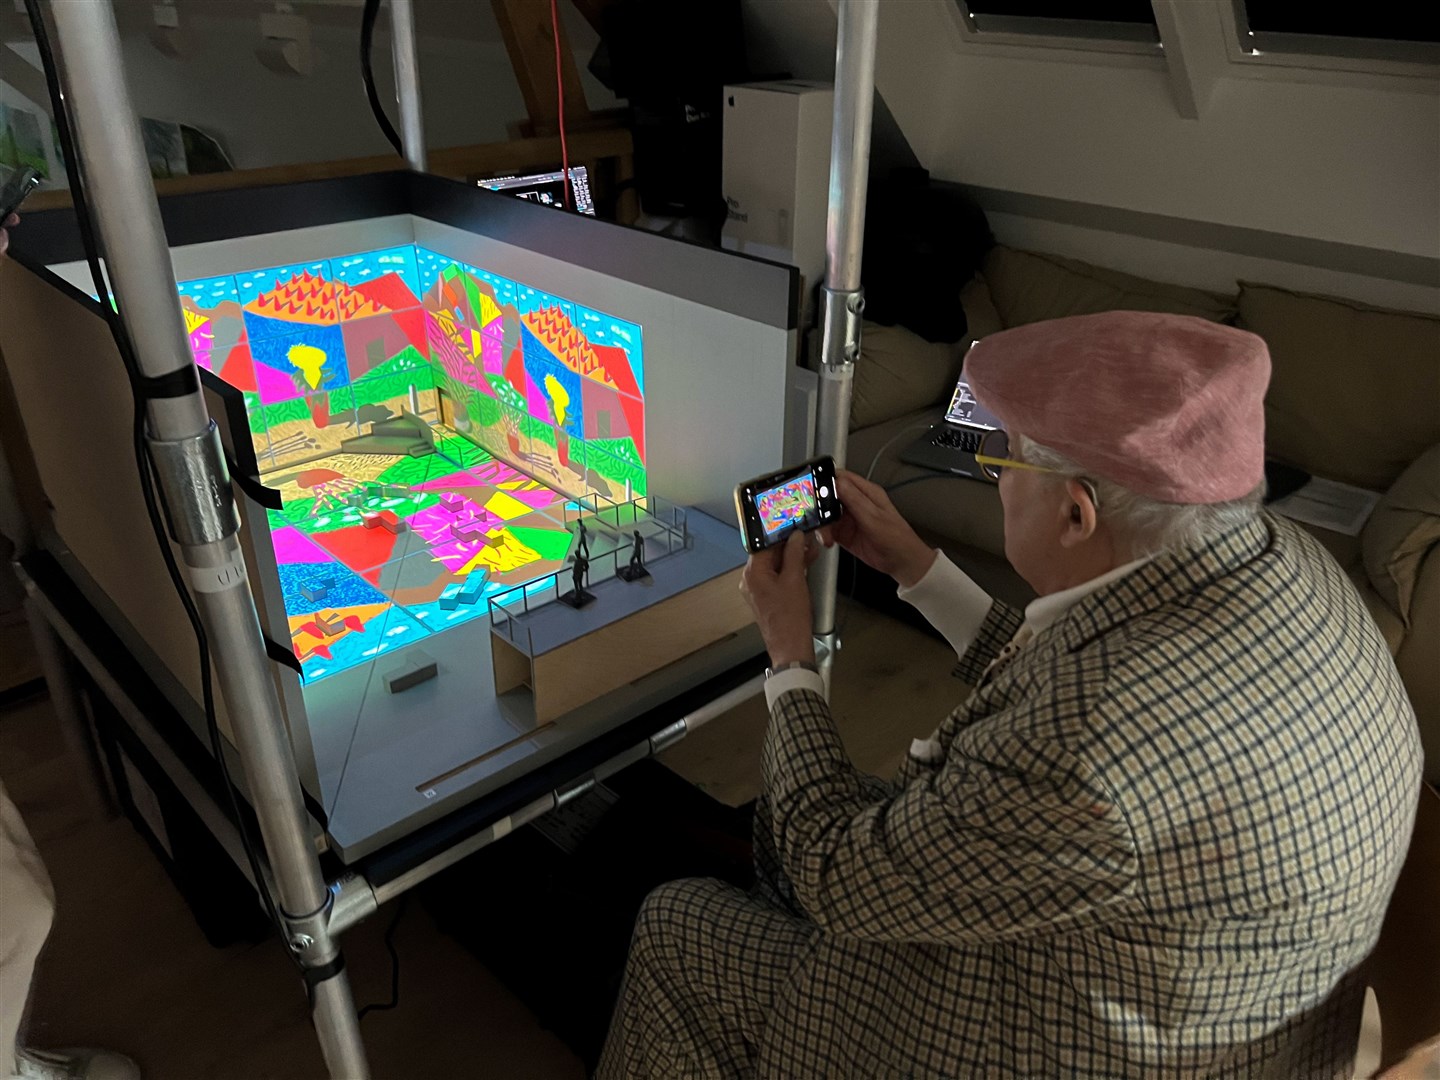 David Hockney viewing the model box containing August 2021, Landscape with Shadows, twelve iPad paintings comprising a single work (Mark Grimmer/PA)